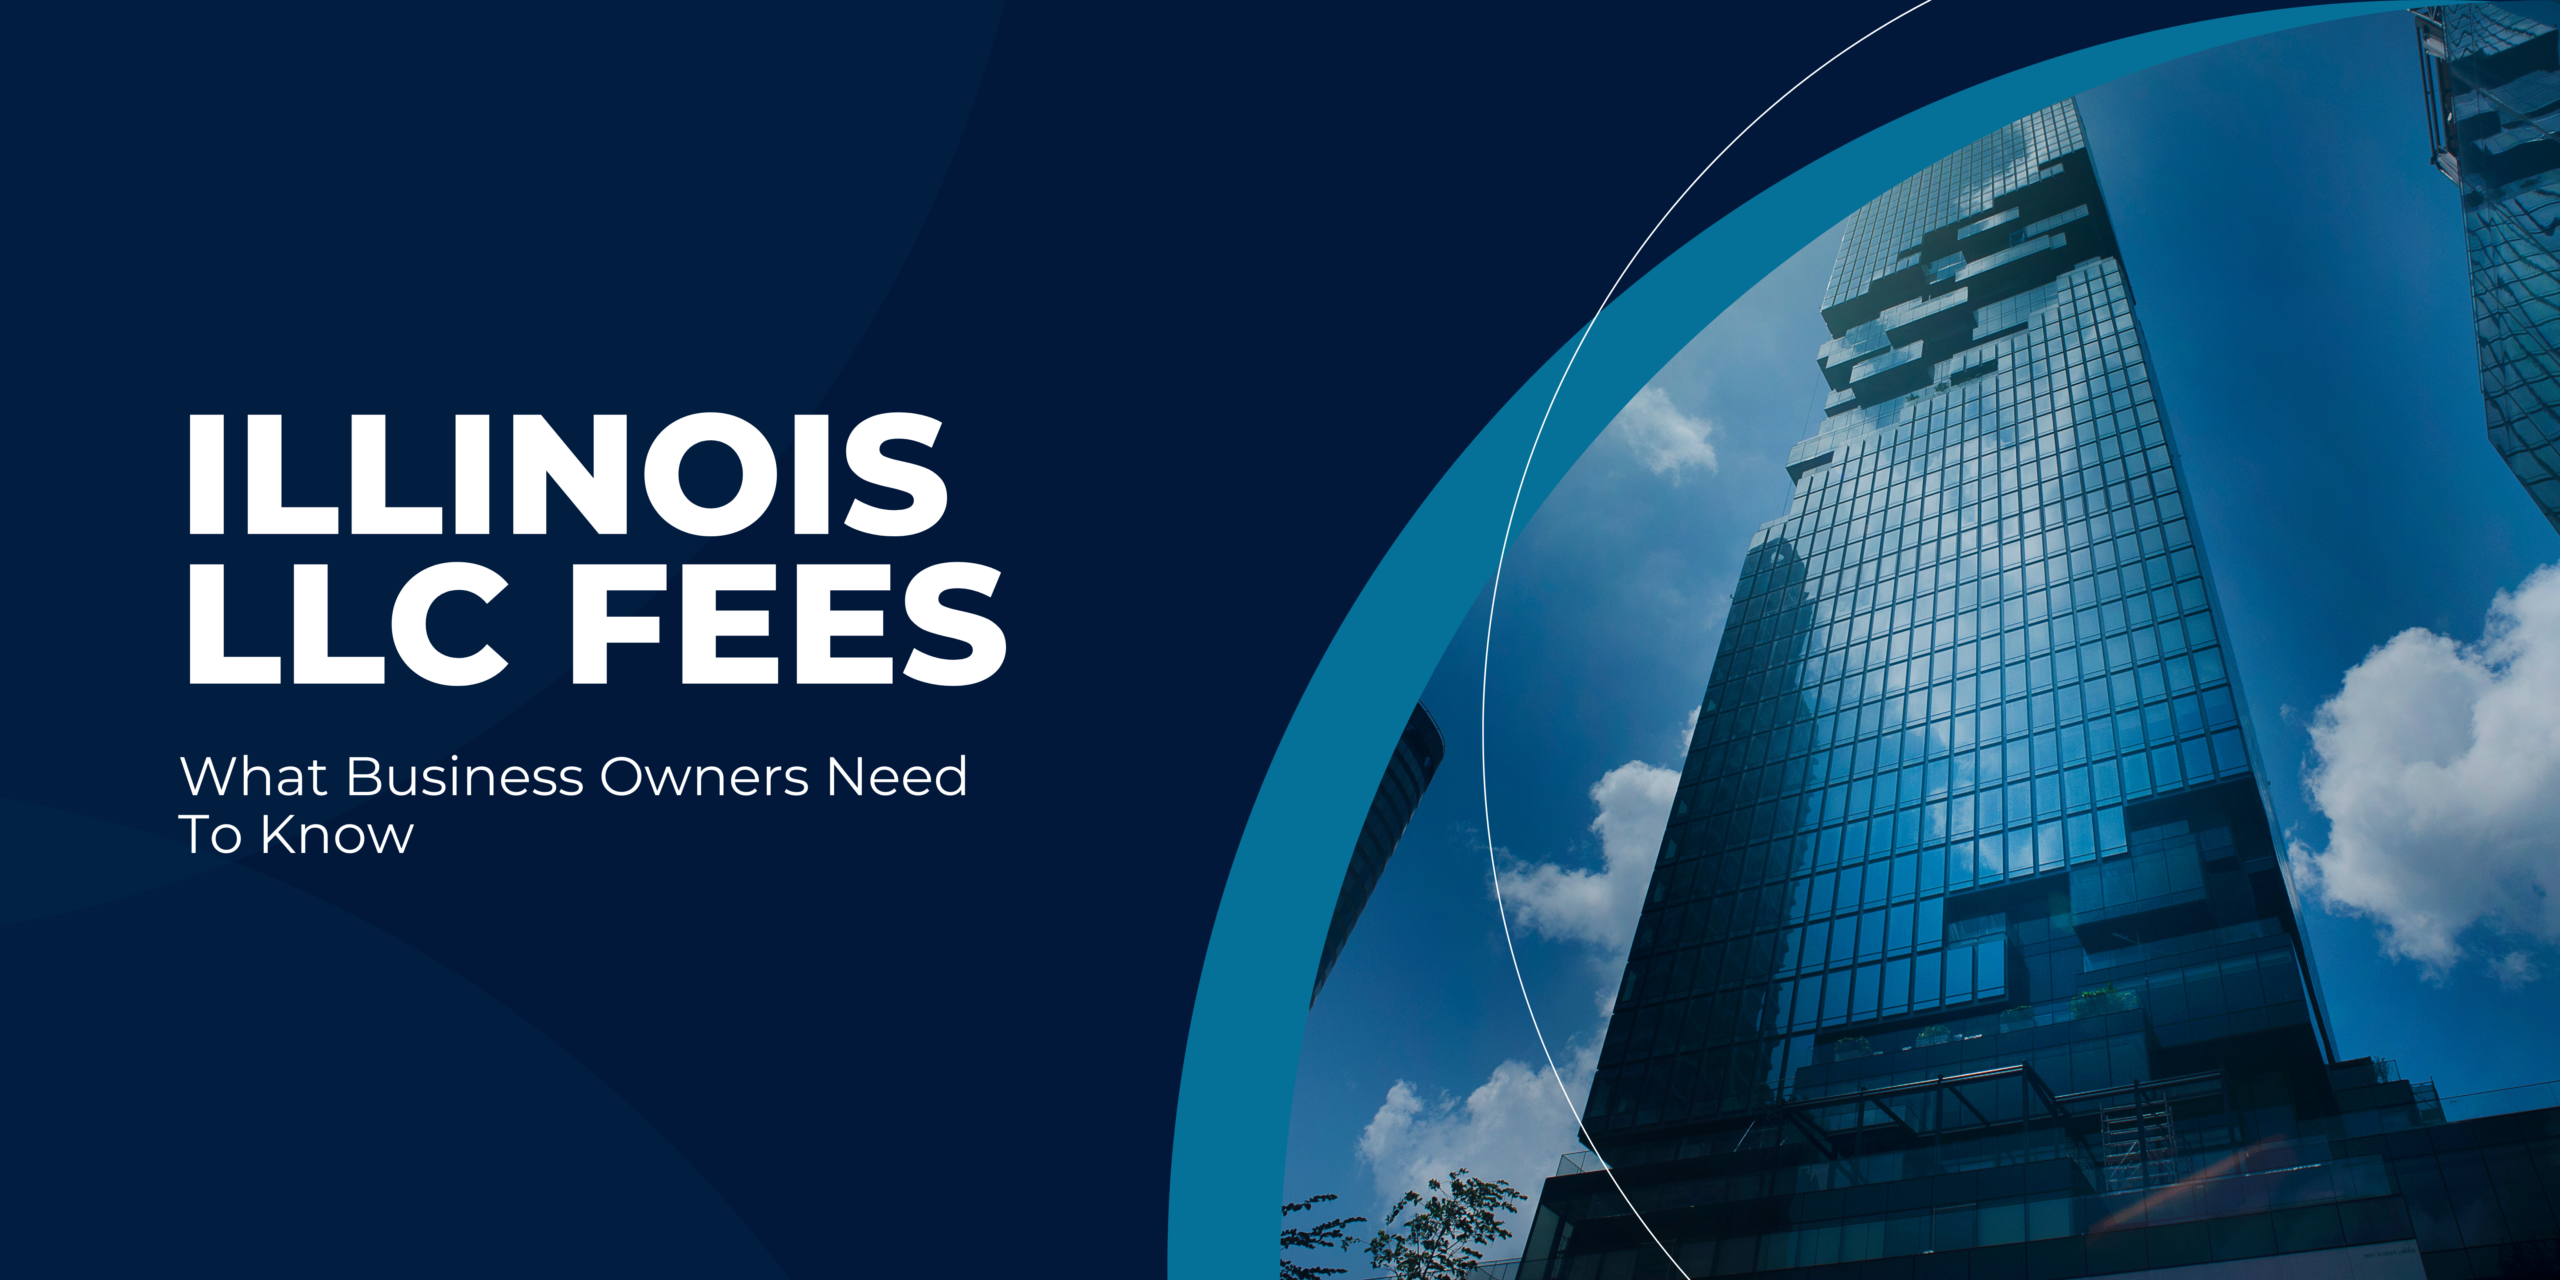 Illinois LLC Fees: What Business Owners Need To Know